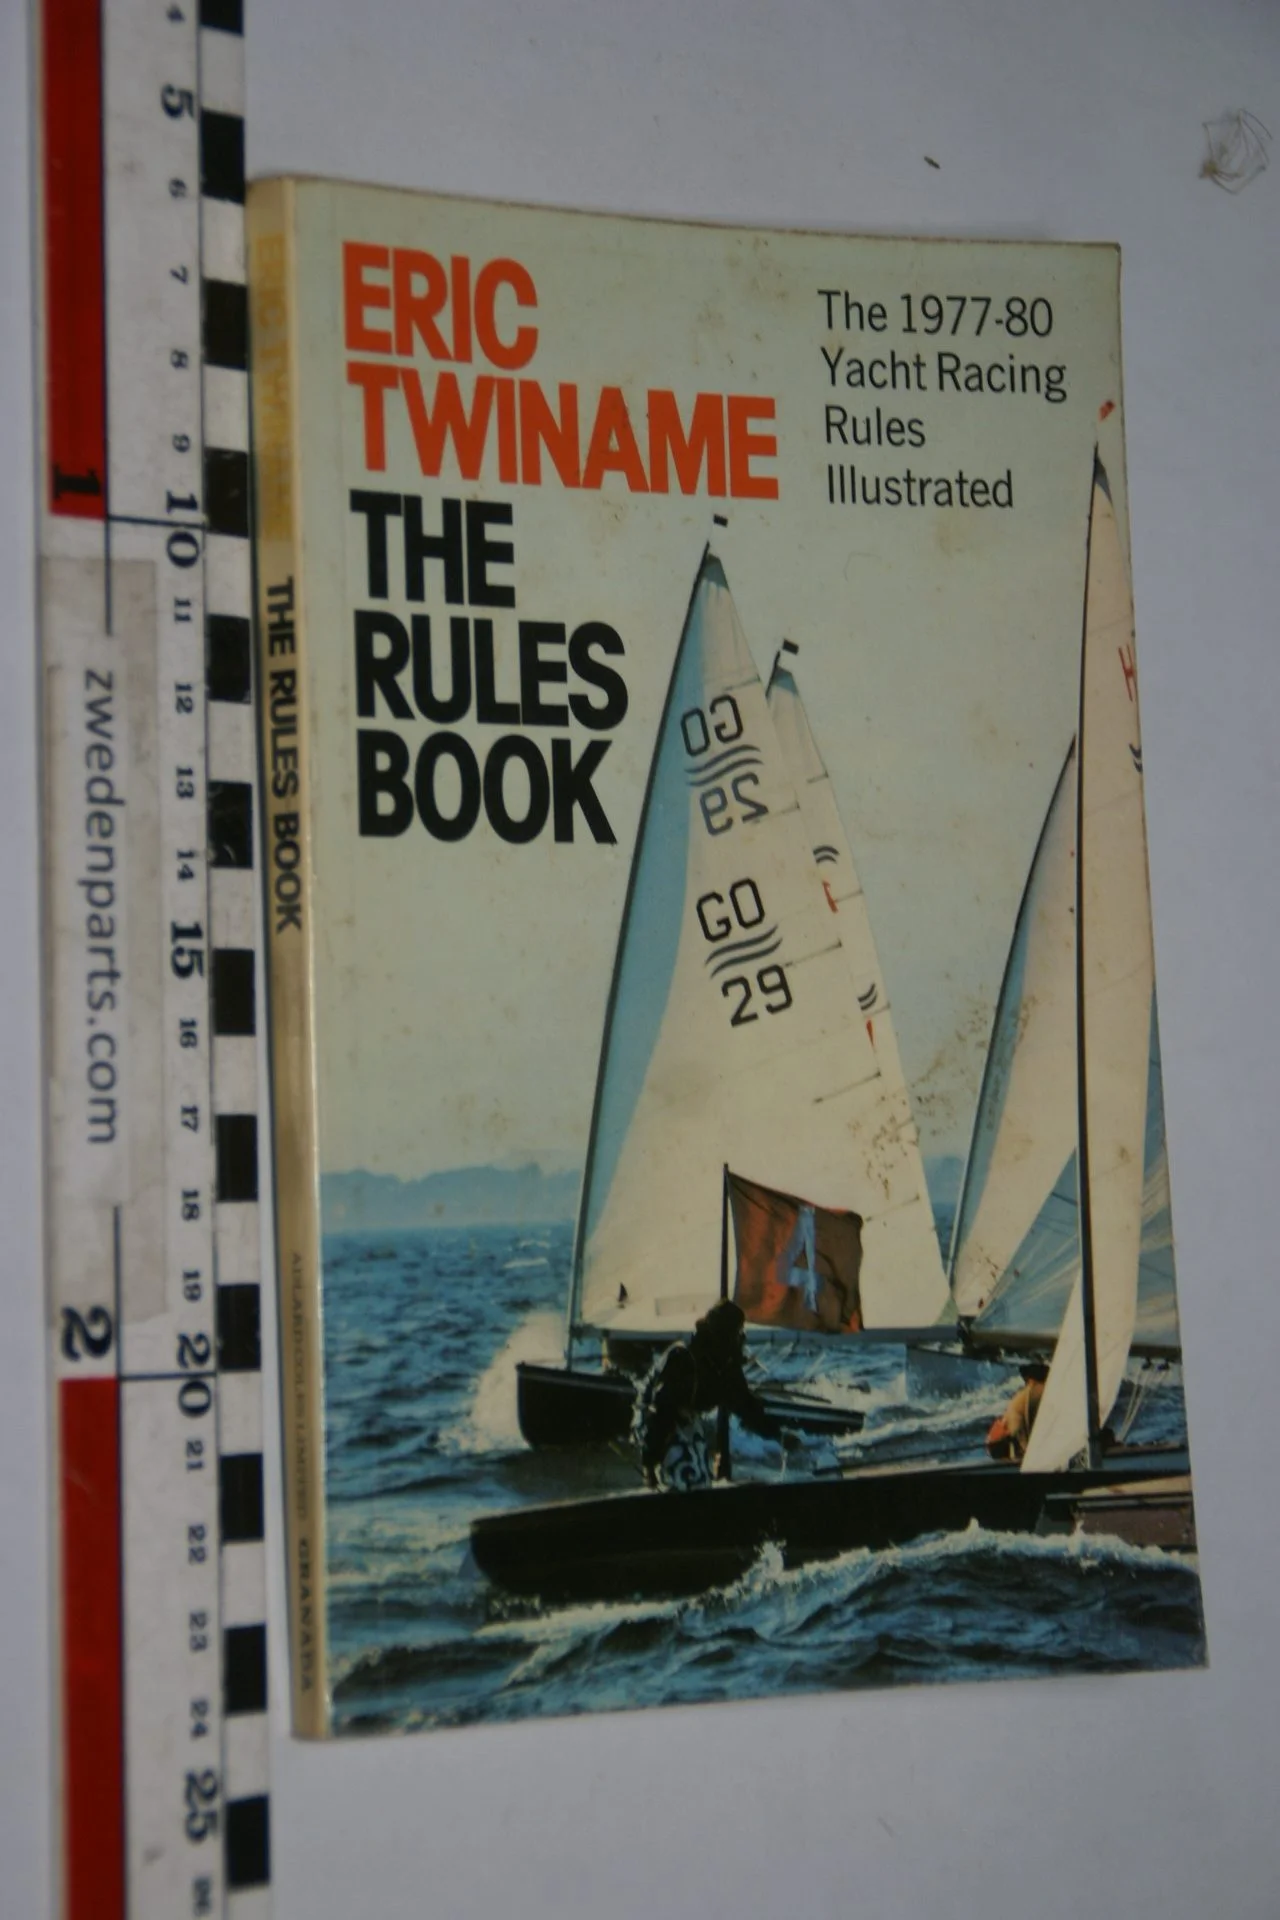 DSC06932 1977 boek The Rules Book by Eric Twiname ISBN 0229115799